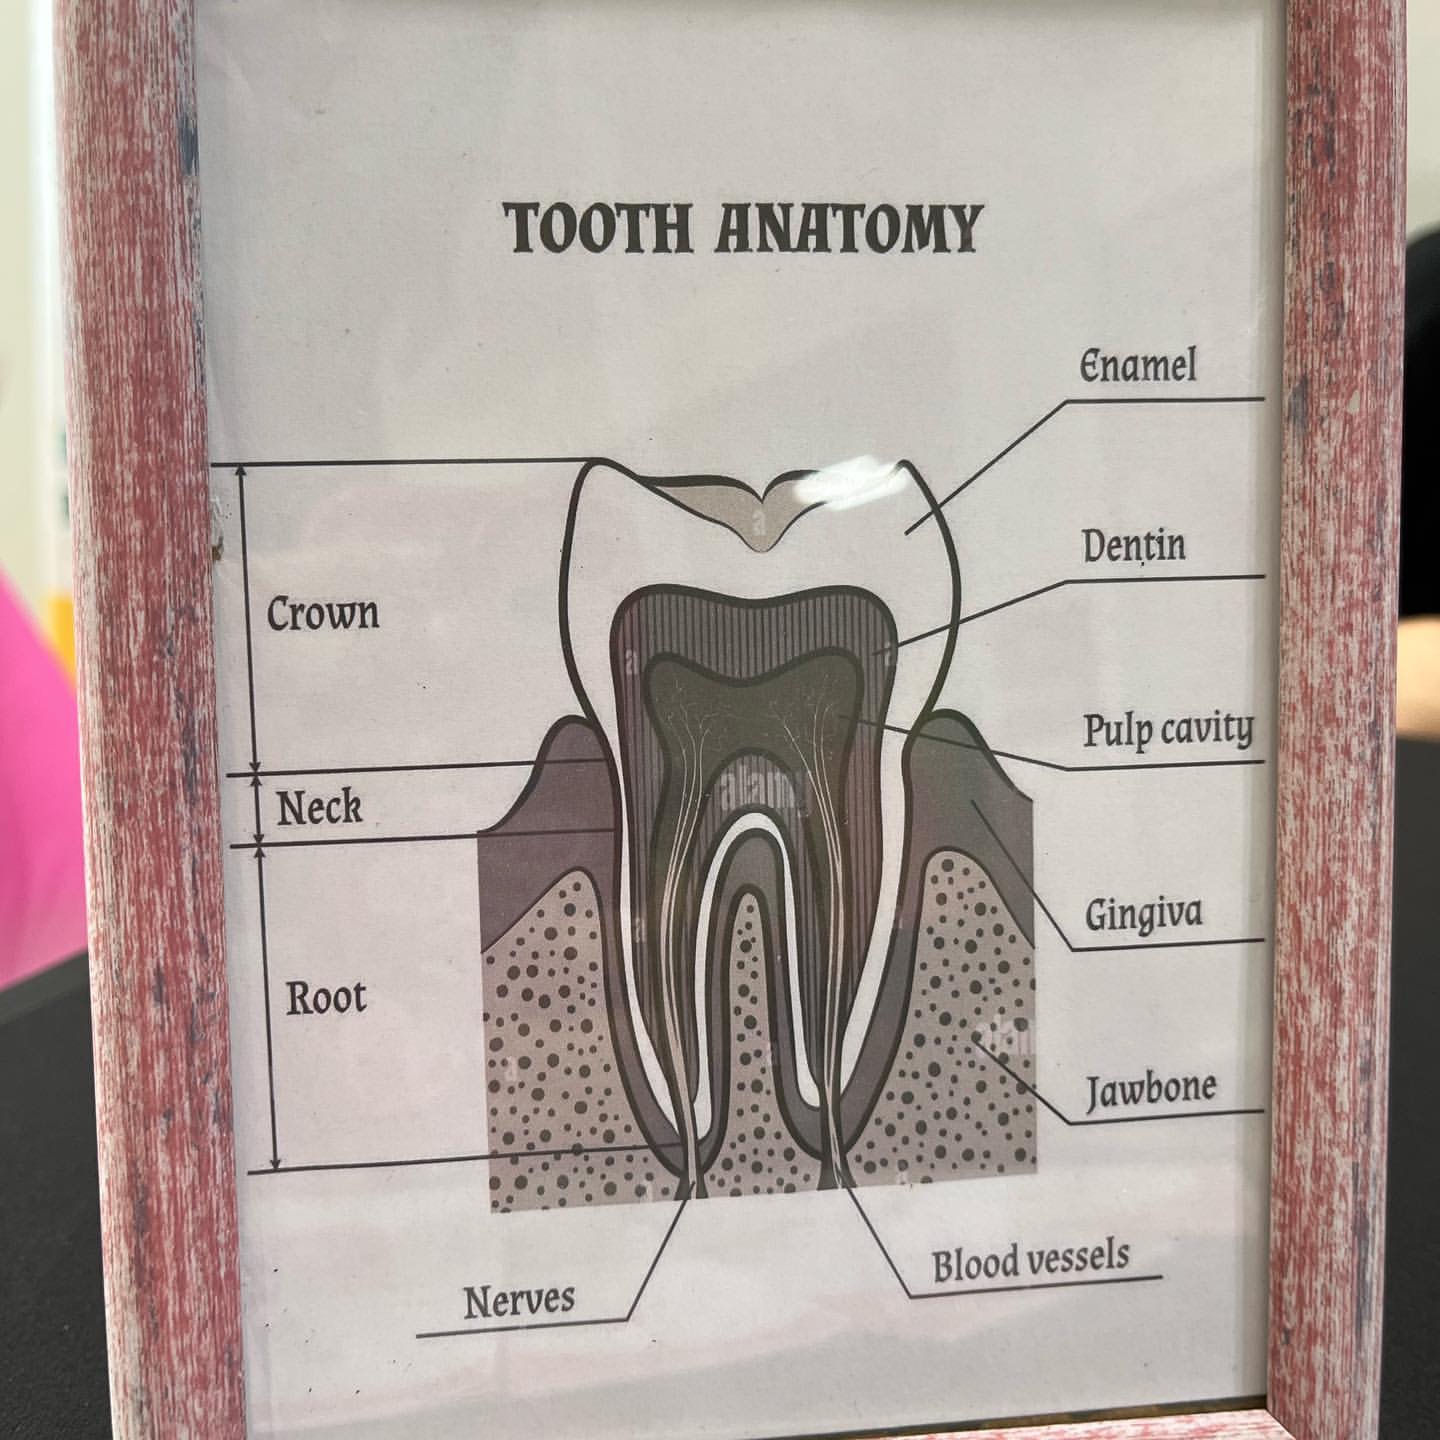 a picture frame with a diagram of the human teeth